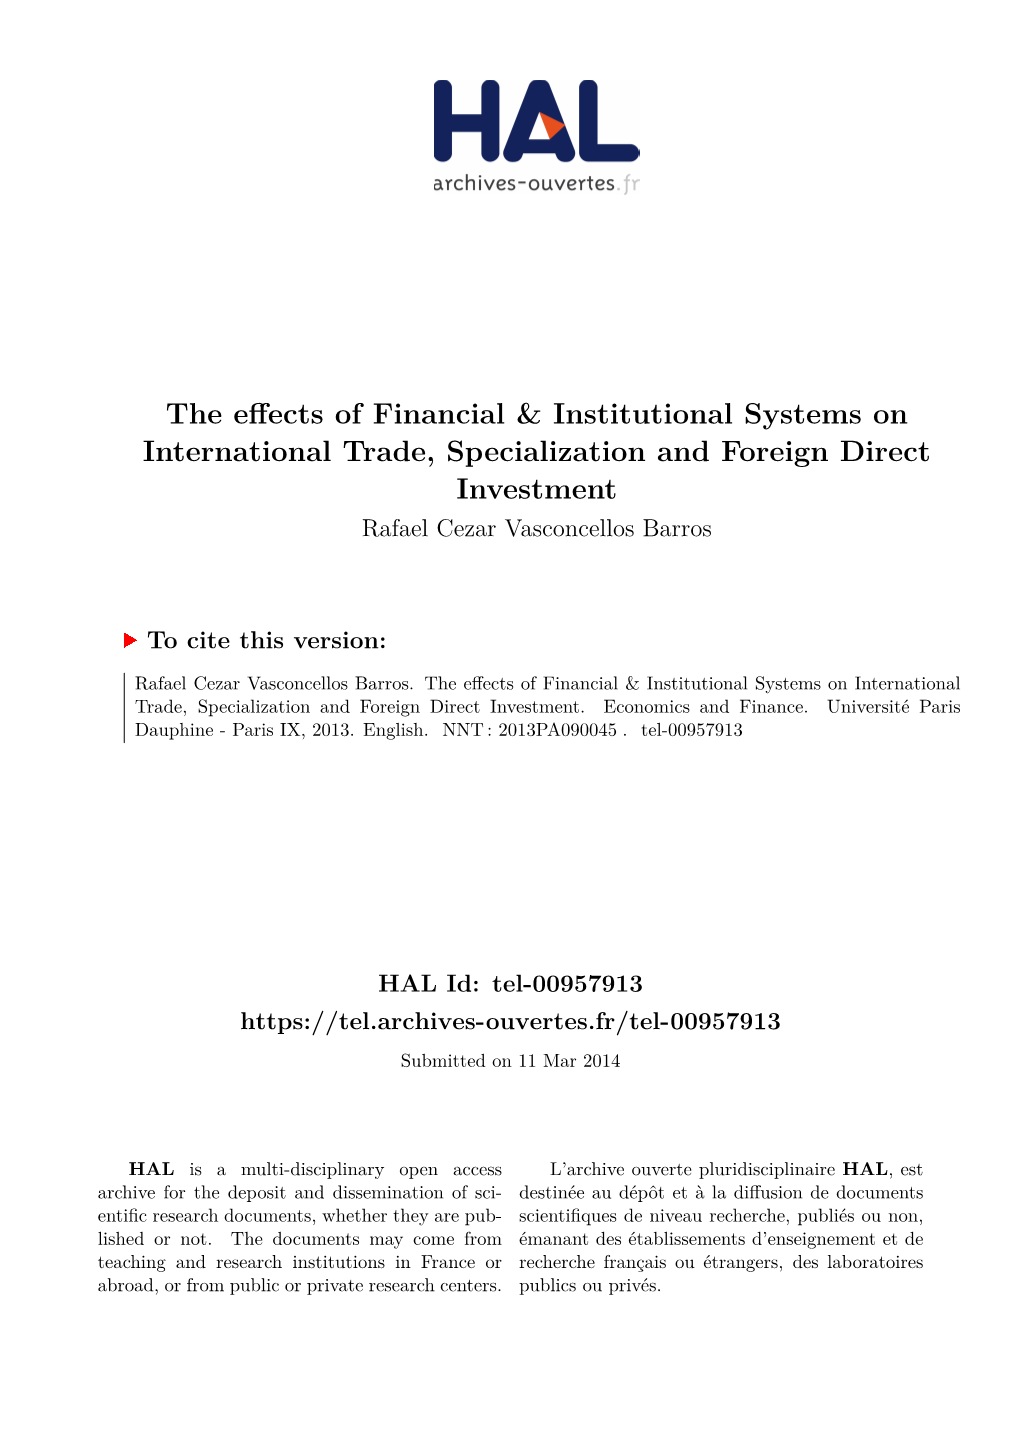 The Effects of Financial & Institutional Systems On